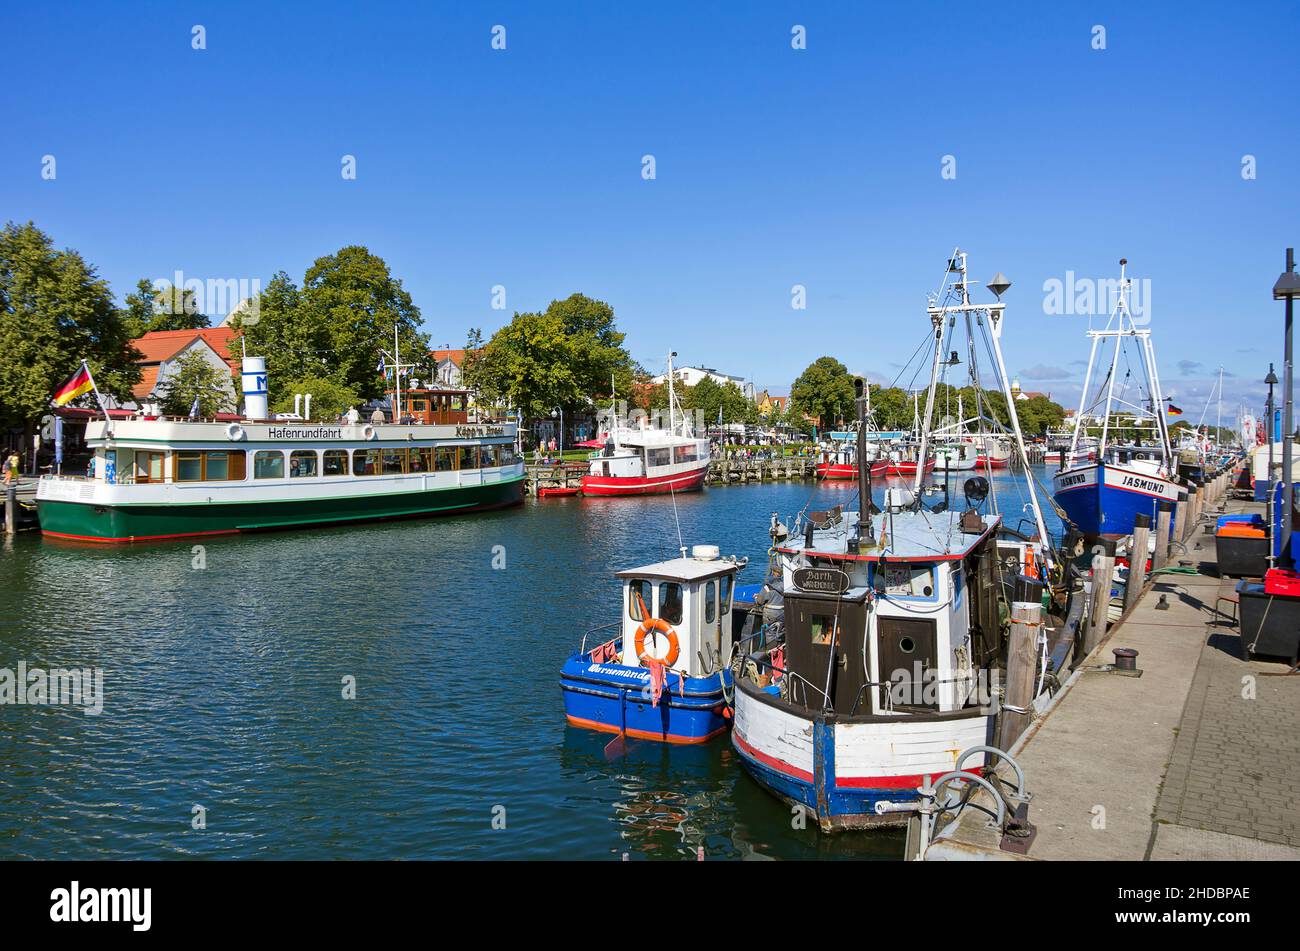 Fishing cutters and excursion boats at Alter Strom in Rostock-Warnemünde, Mecklenburg-Western Pomerania, Germany, August 26, 2014. Stock Photo